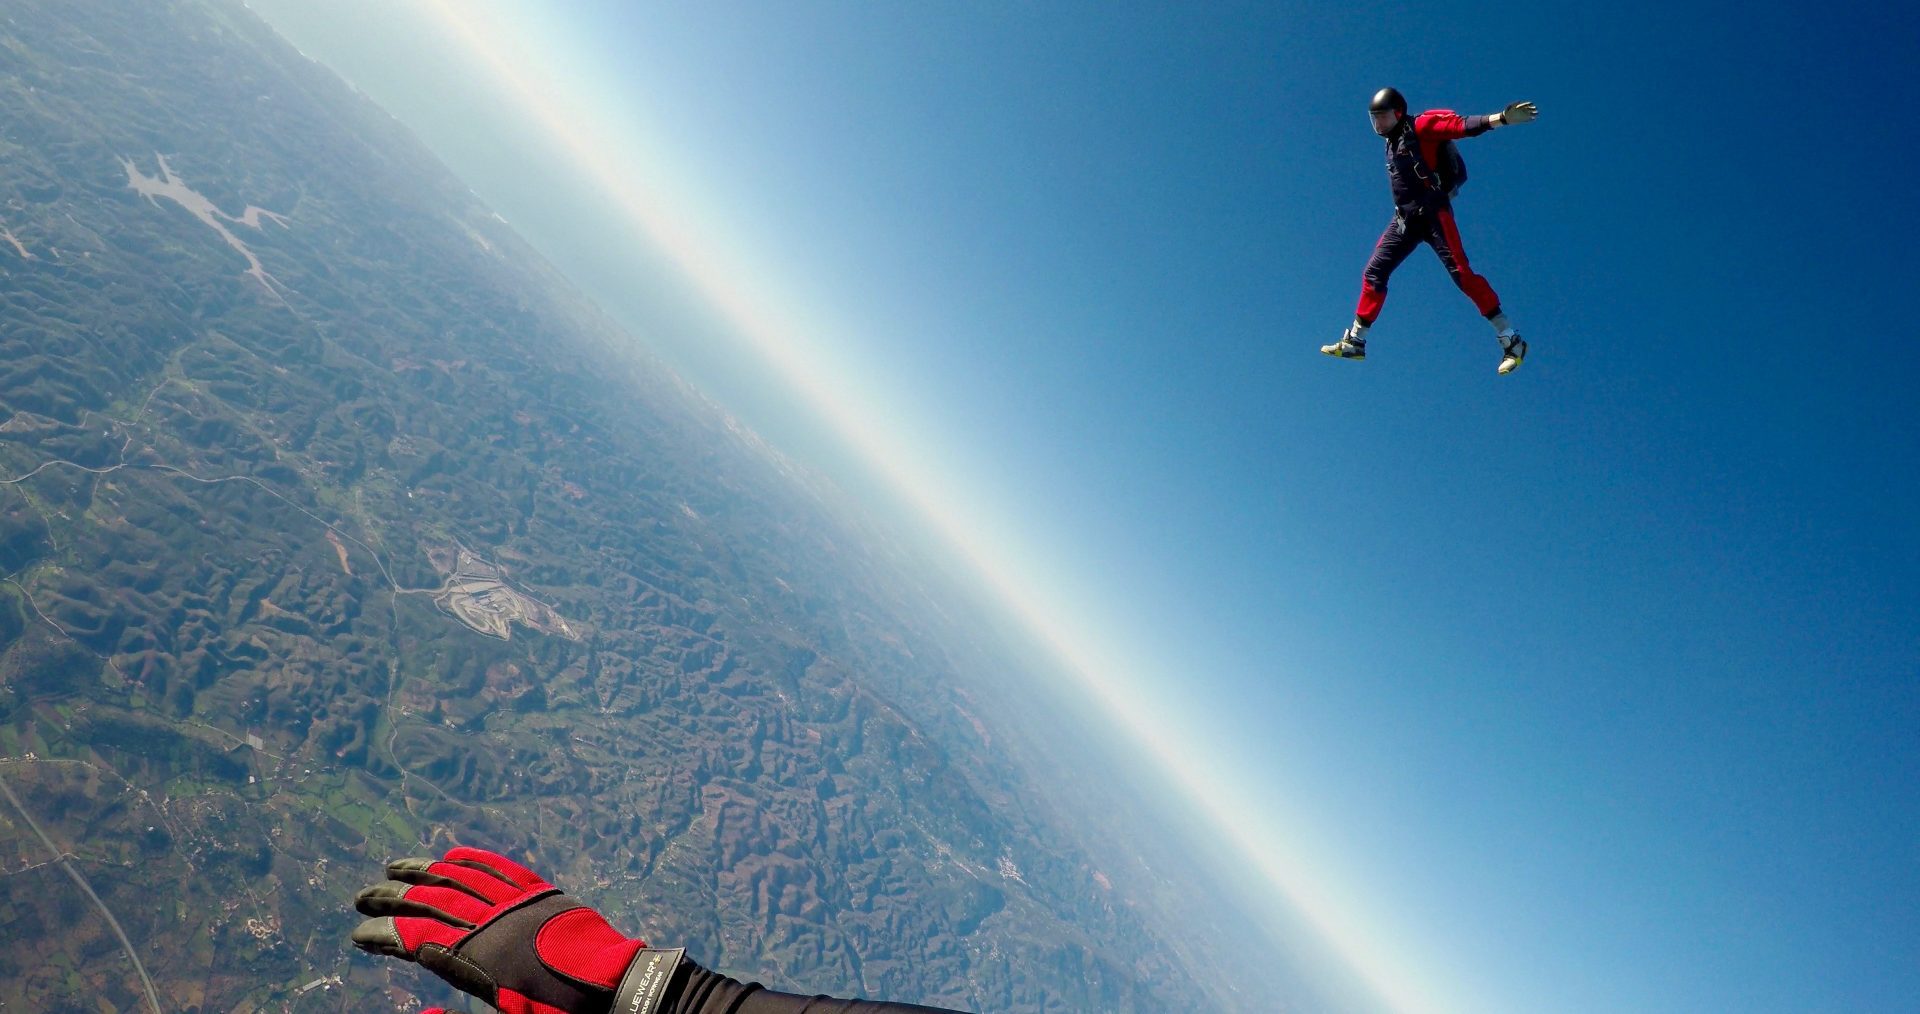 Man jumps out of plane in a skydive